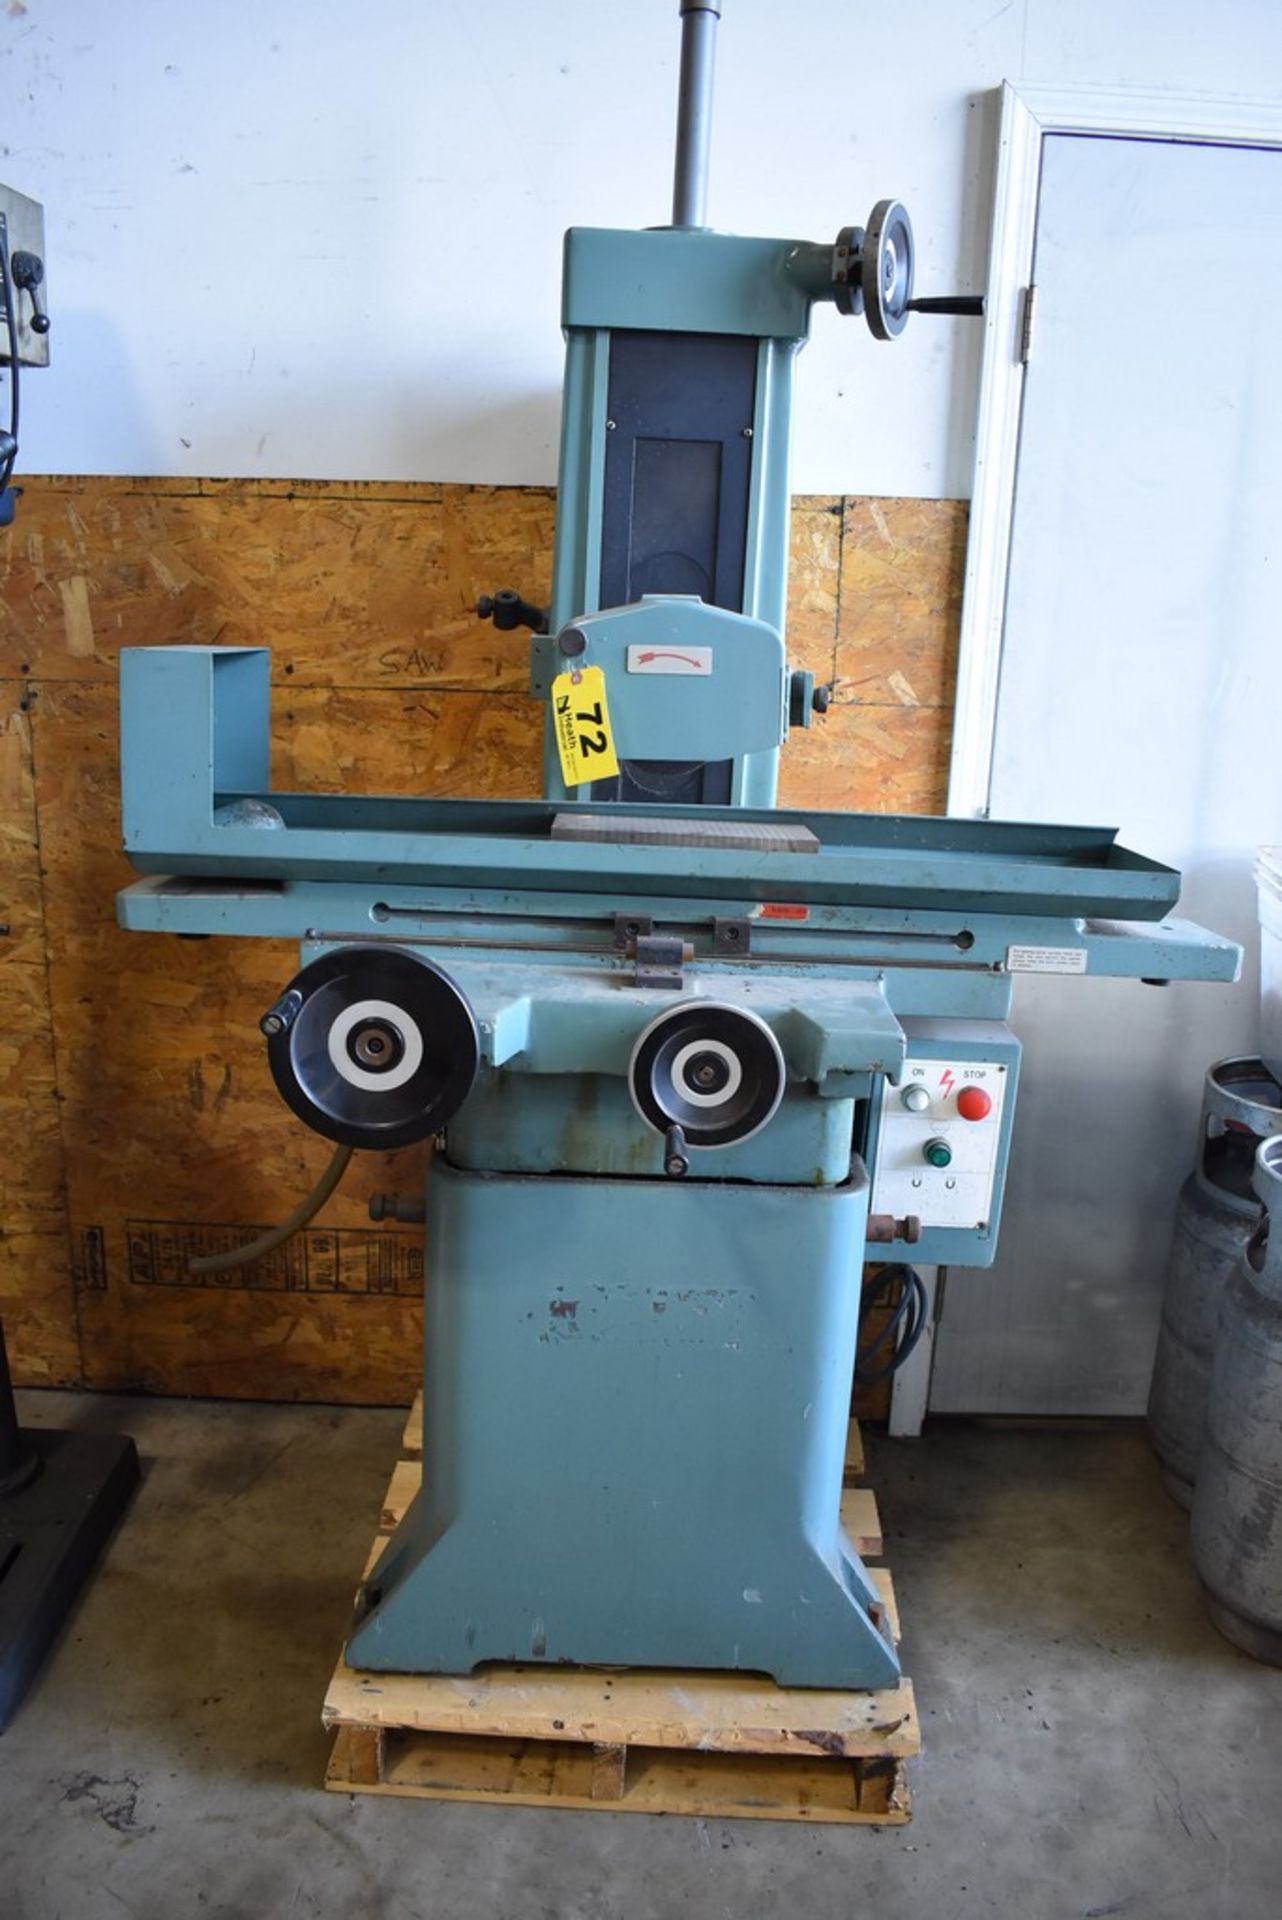 ENCO 6"X12" MODEL 120-6718 SURFACE GRINDER, S/N 6, WITH PERMANENT MAGNETIC CHUCK